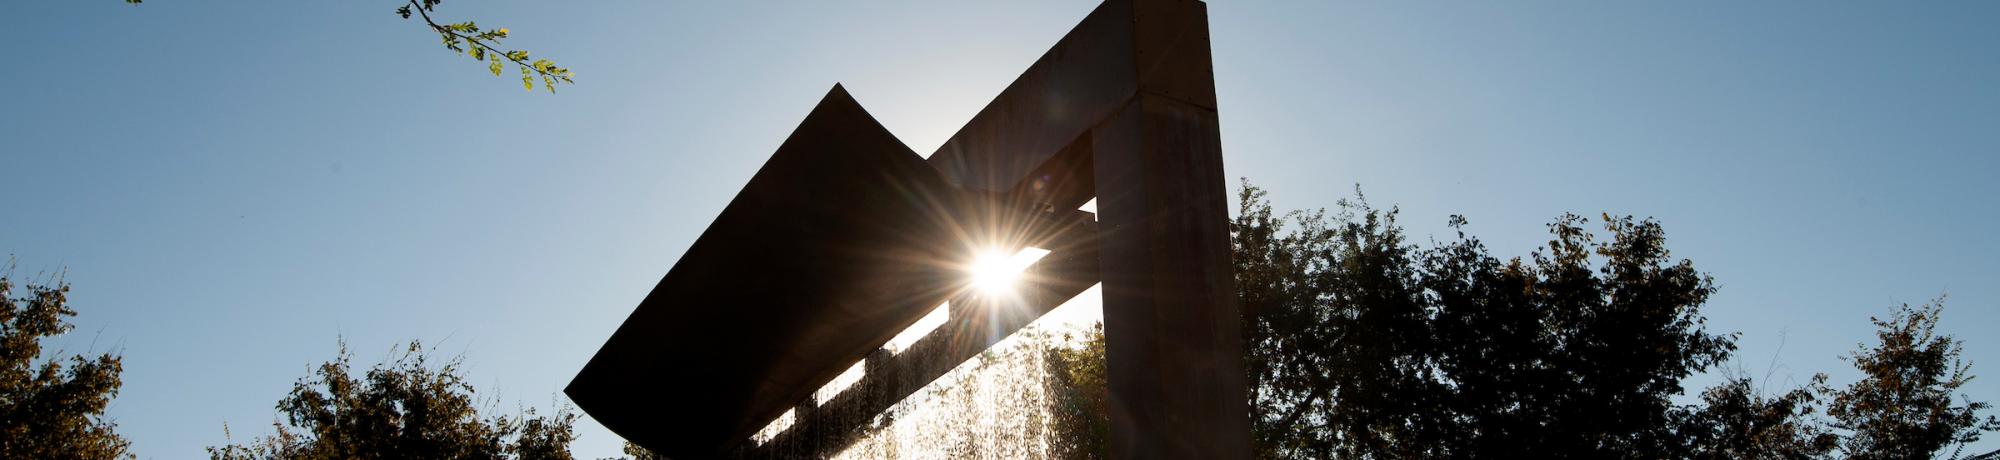 The sun sends streams of sunlight through water of the Morris Fountain in the Vanderhoef Quad on September 20, 2018. - Gregory Urquiaga